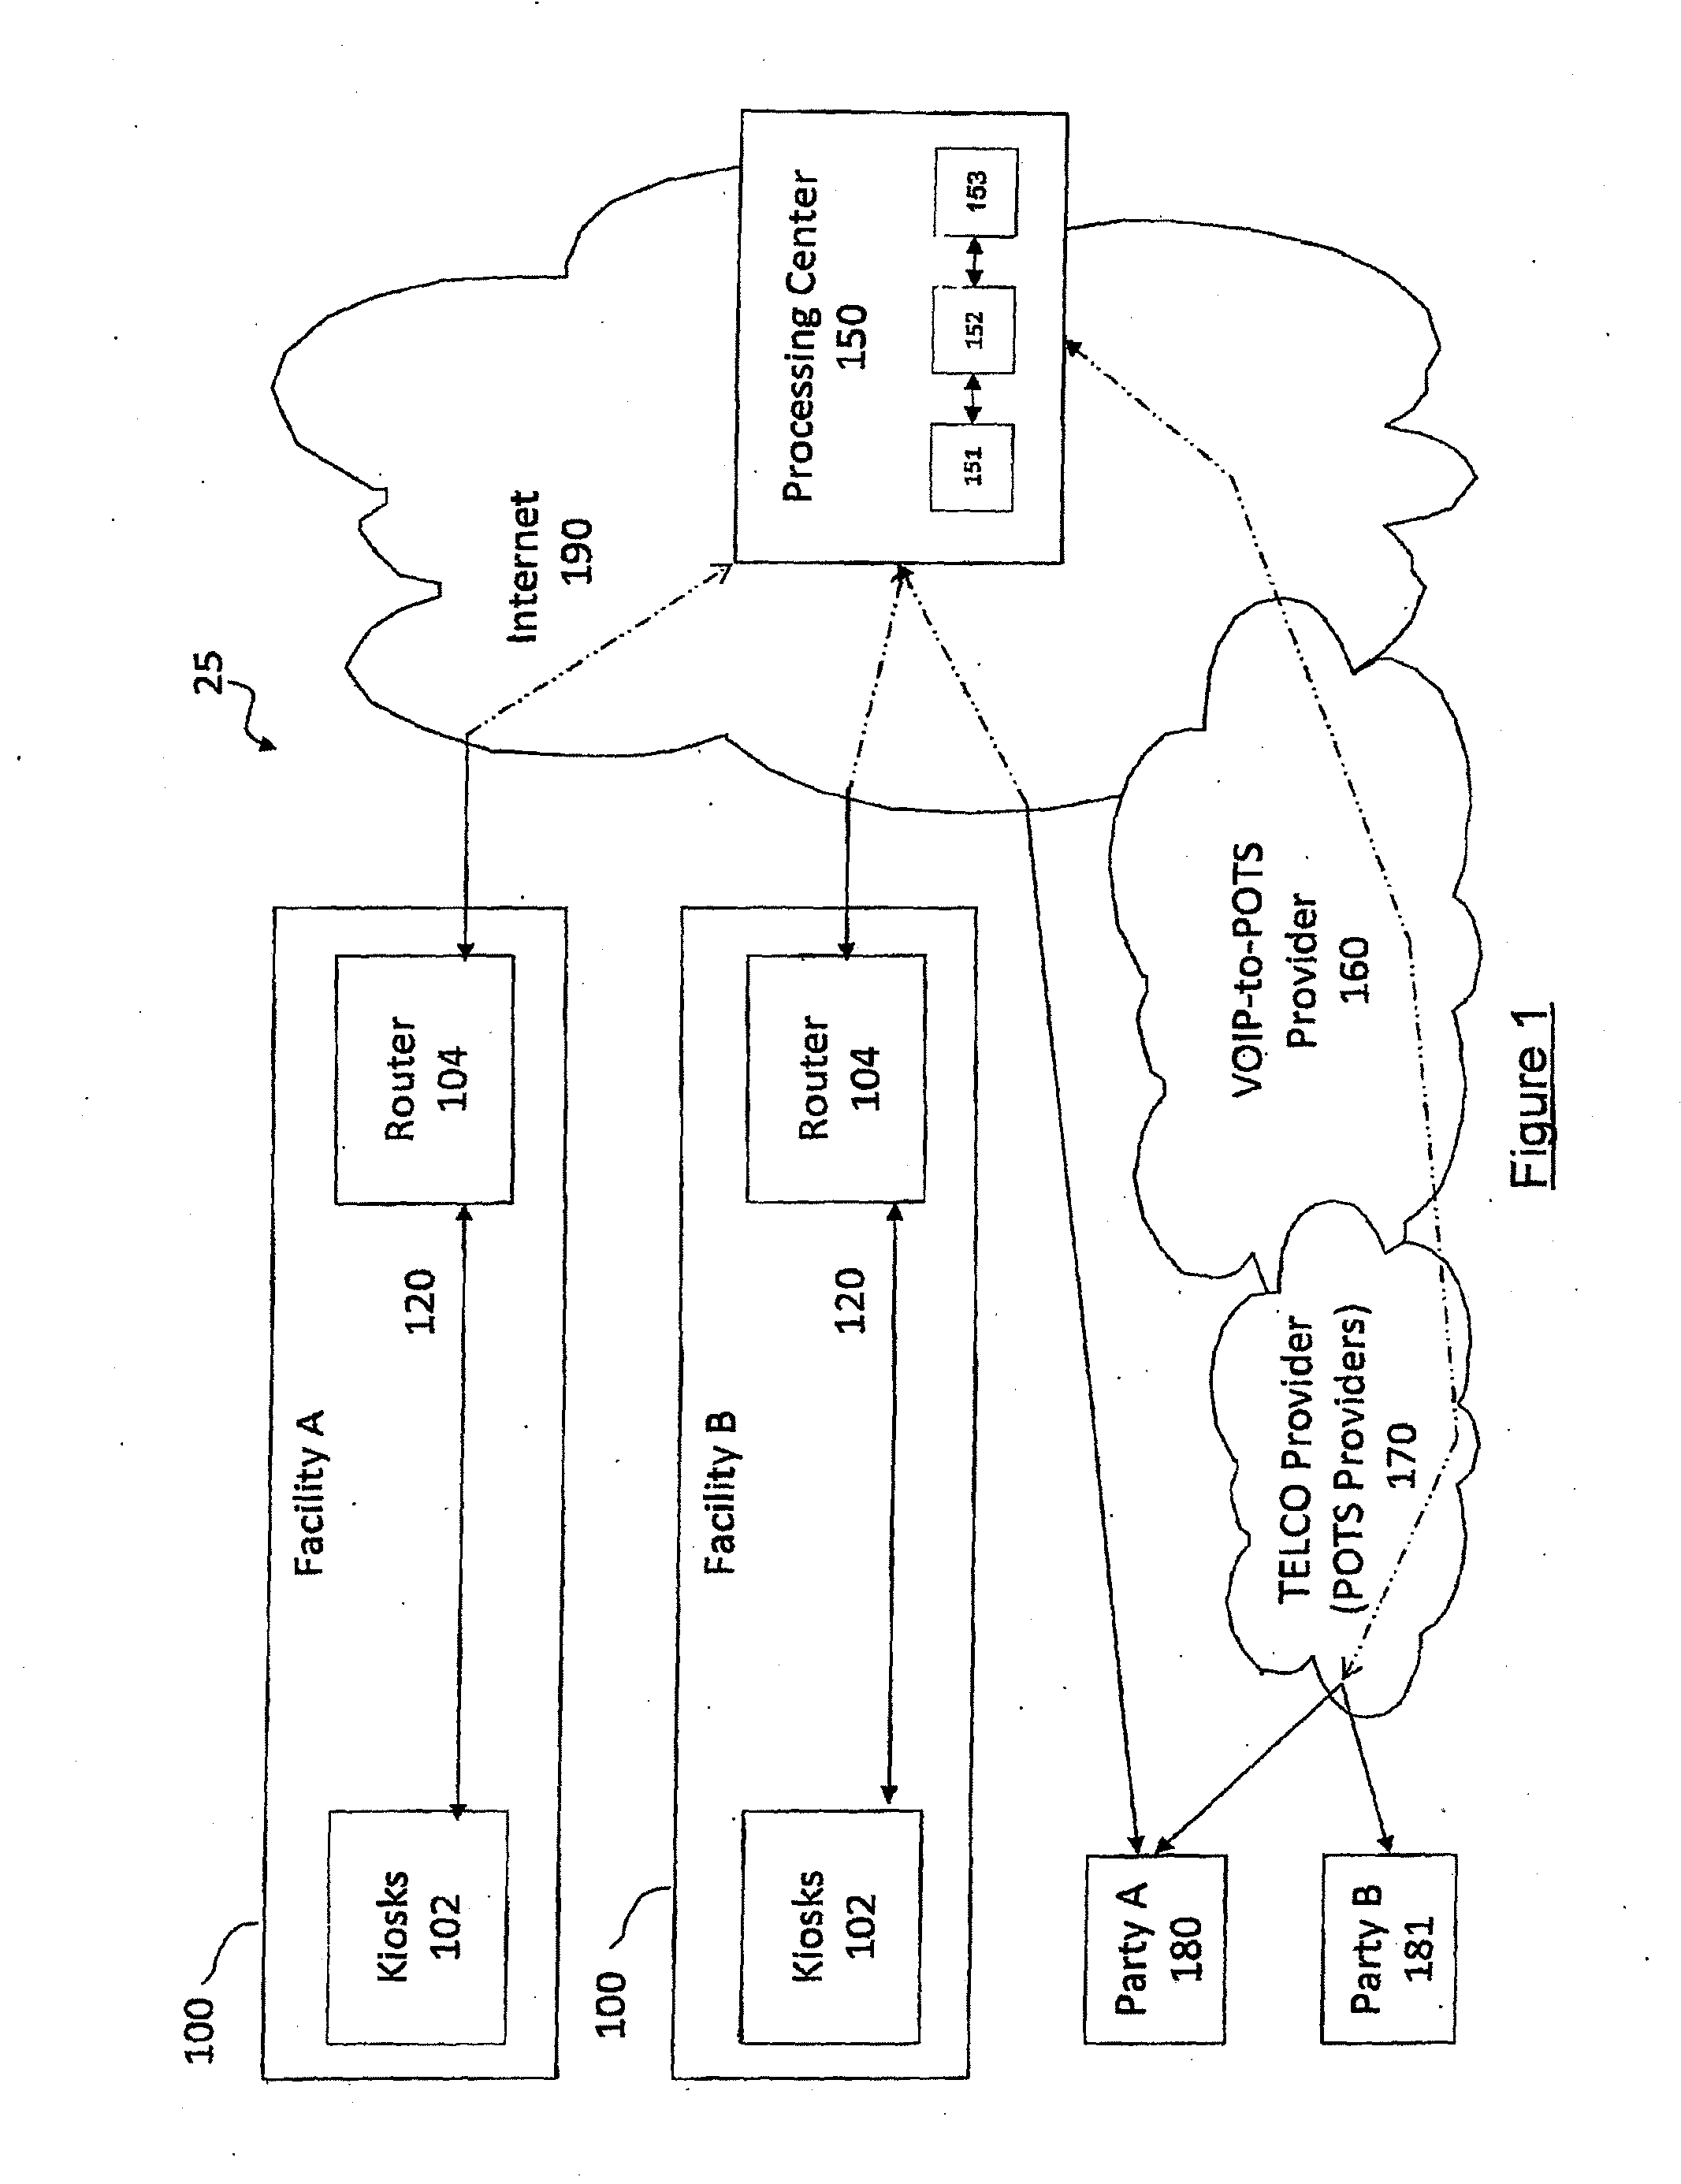 Interactive audio/video system and device for use in a secure facility